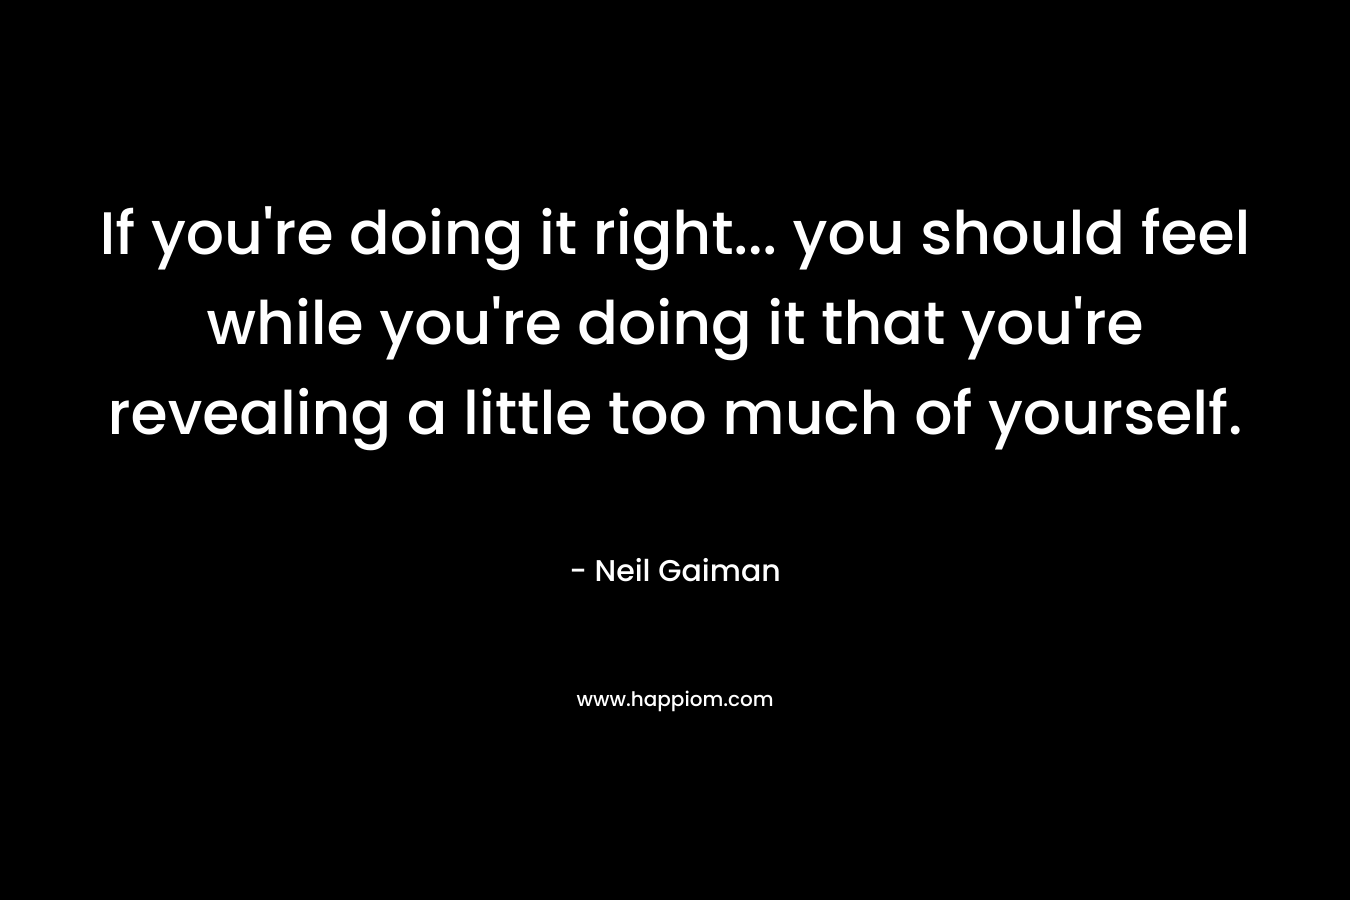 If you’re doing it right… you should feel while you’re doing it that you’re revealing a little too much of yourself. – Neil Gaiman